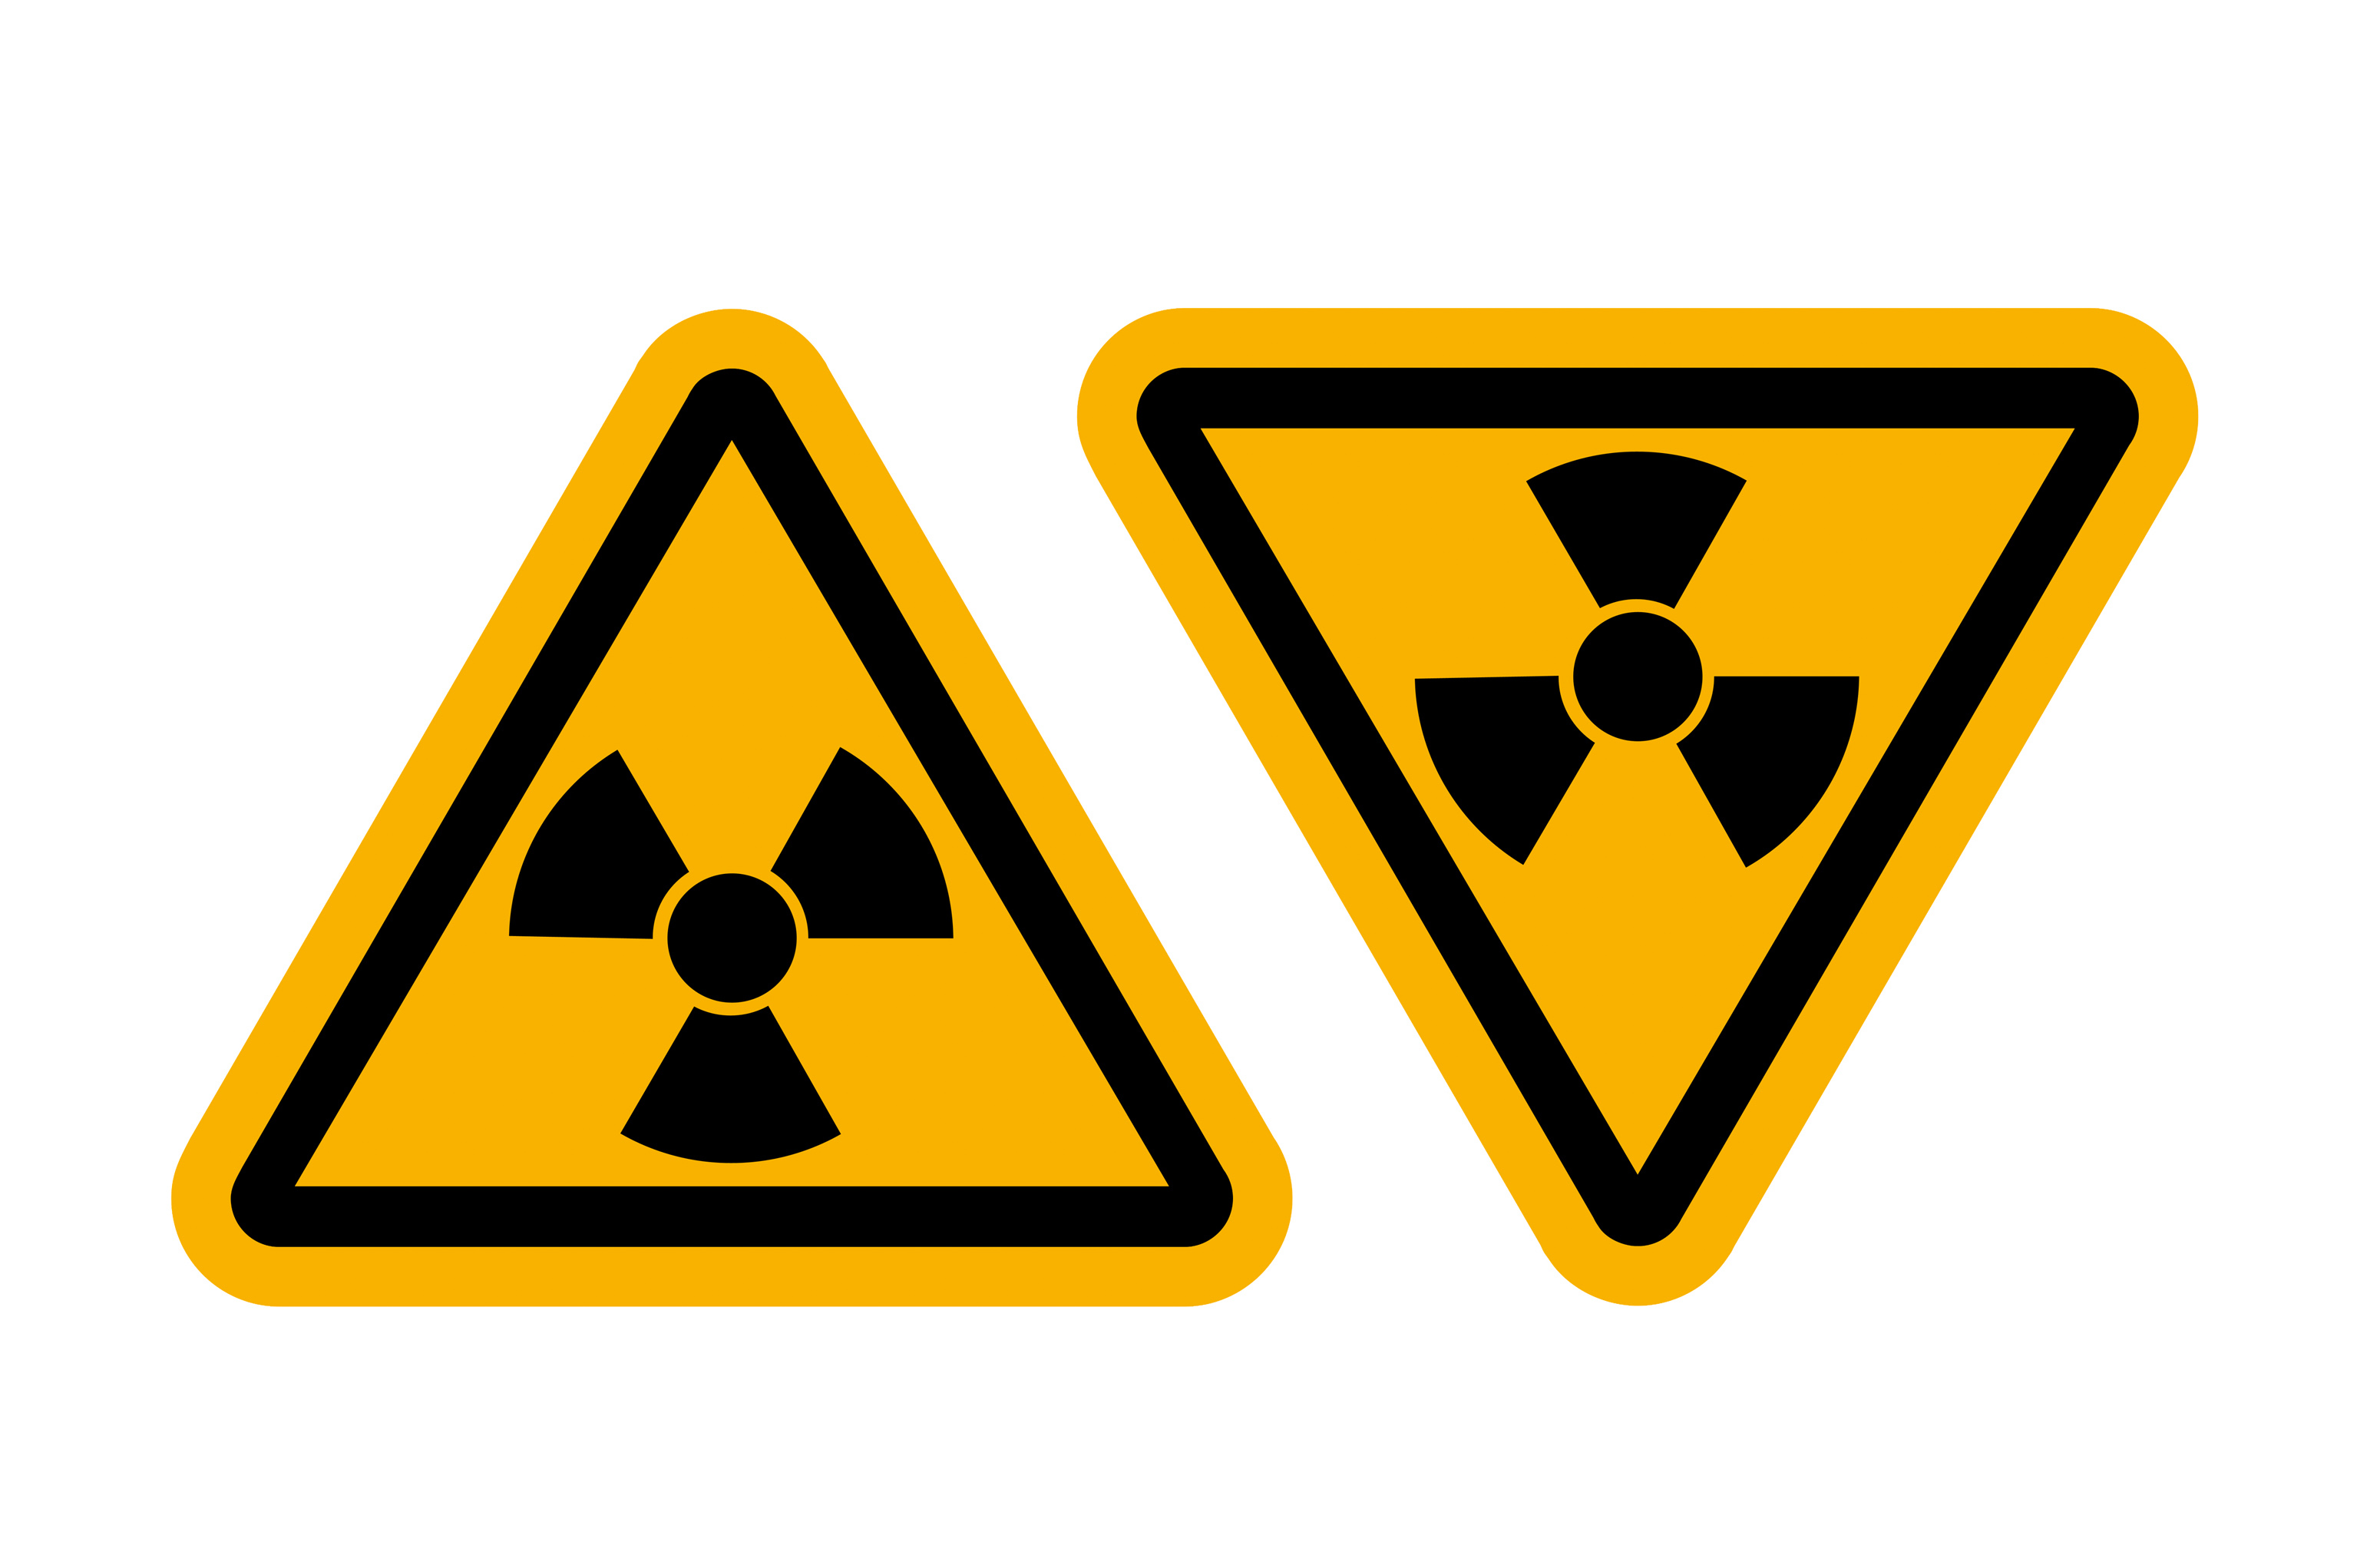 Radiation signs with glossy yellow surface